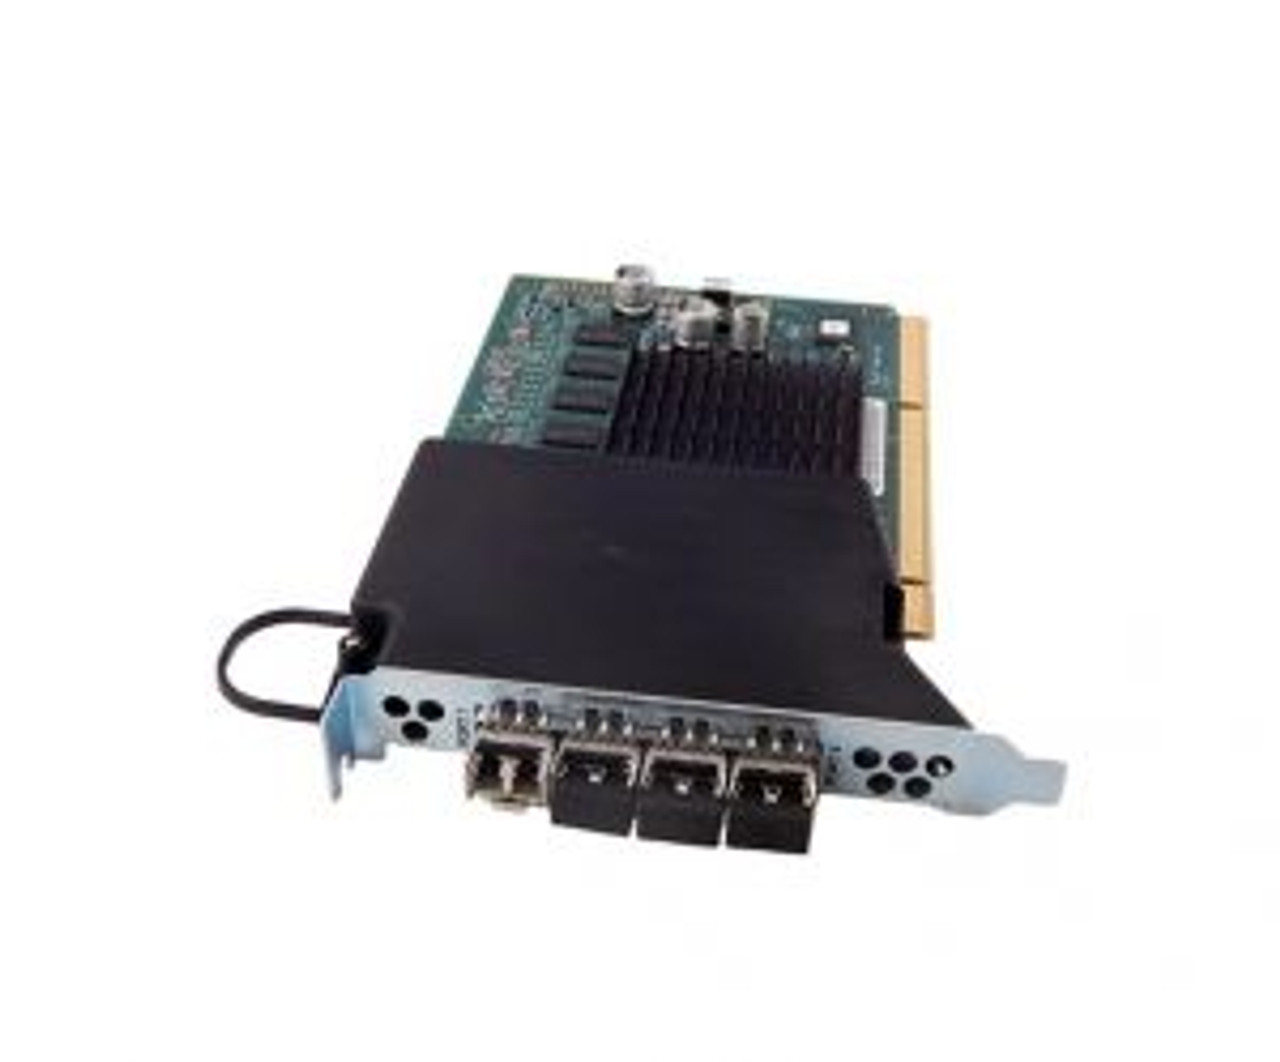 C8S94A HP 3PAR StoreServ 20000 2-Port 10Gb Converged Network Adapter 2 Port(s)